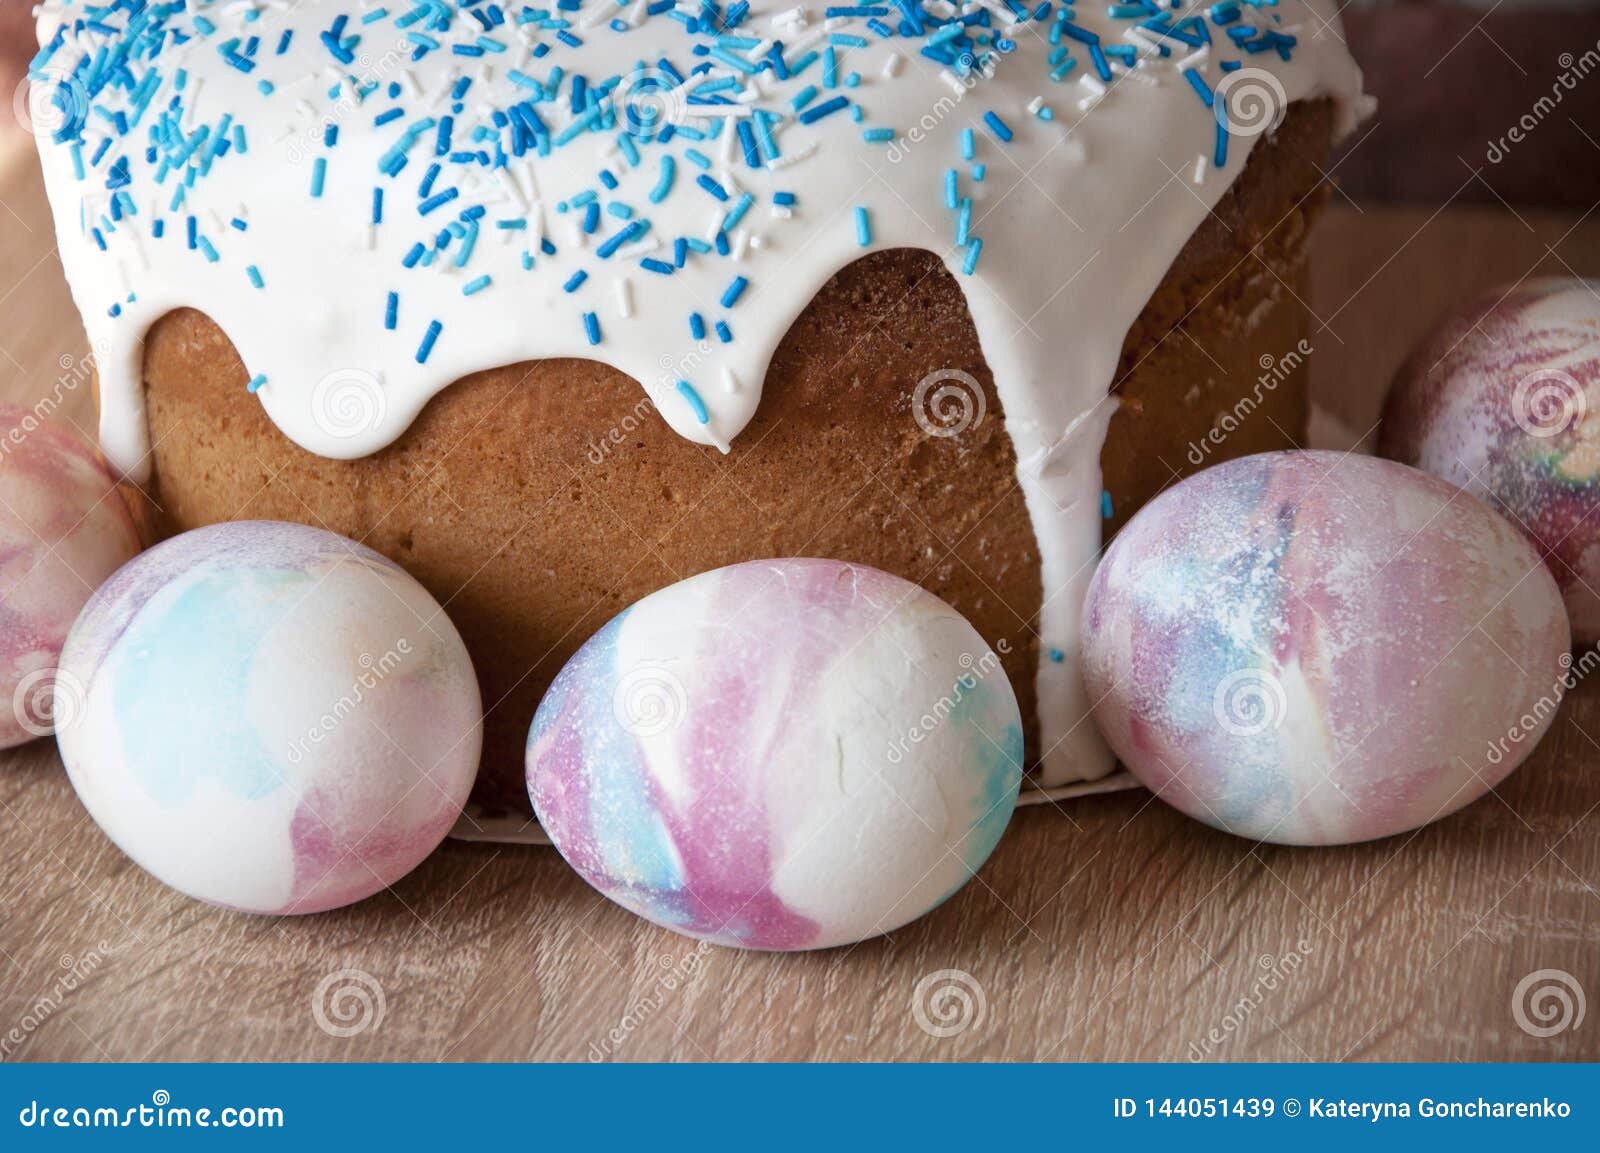 spring holiday prepare. marble shell. happy easter. dessert. backery. easter cake with sprinkles on glaze. painted eggs. easter